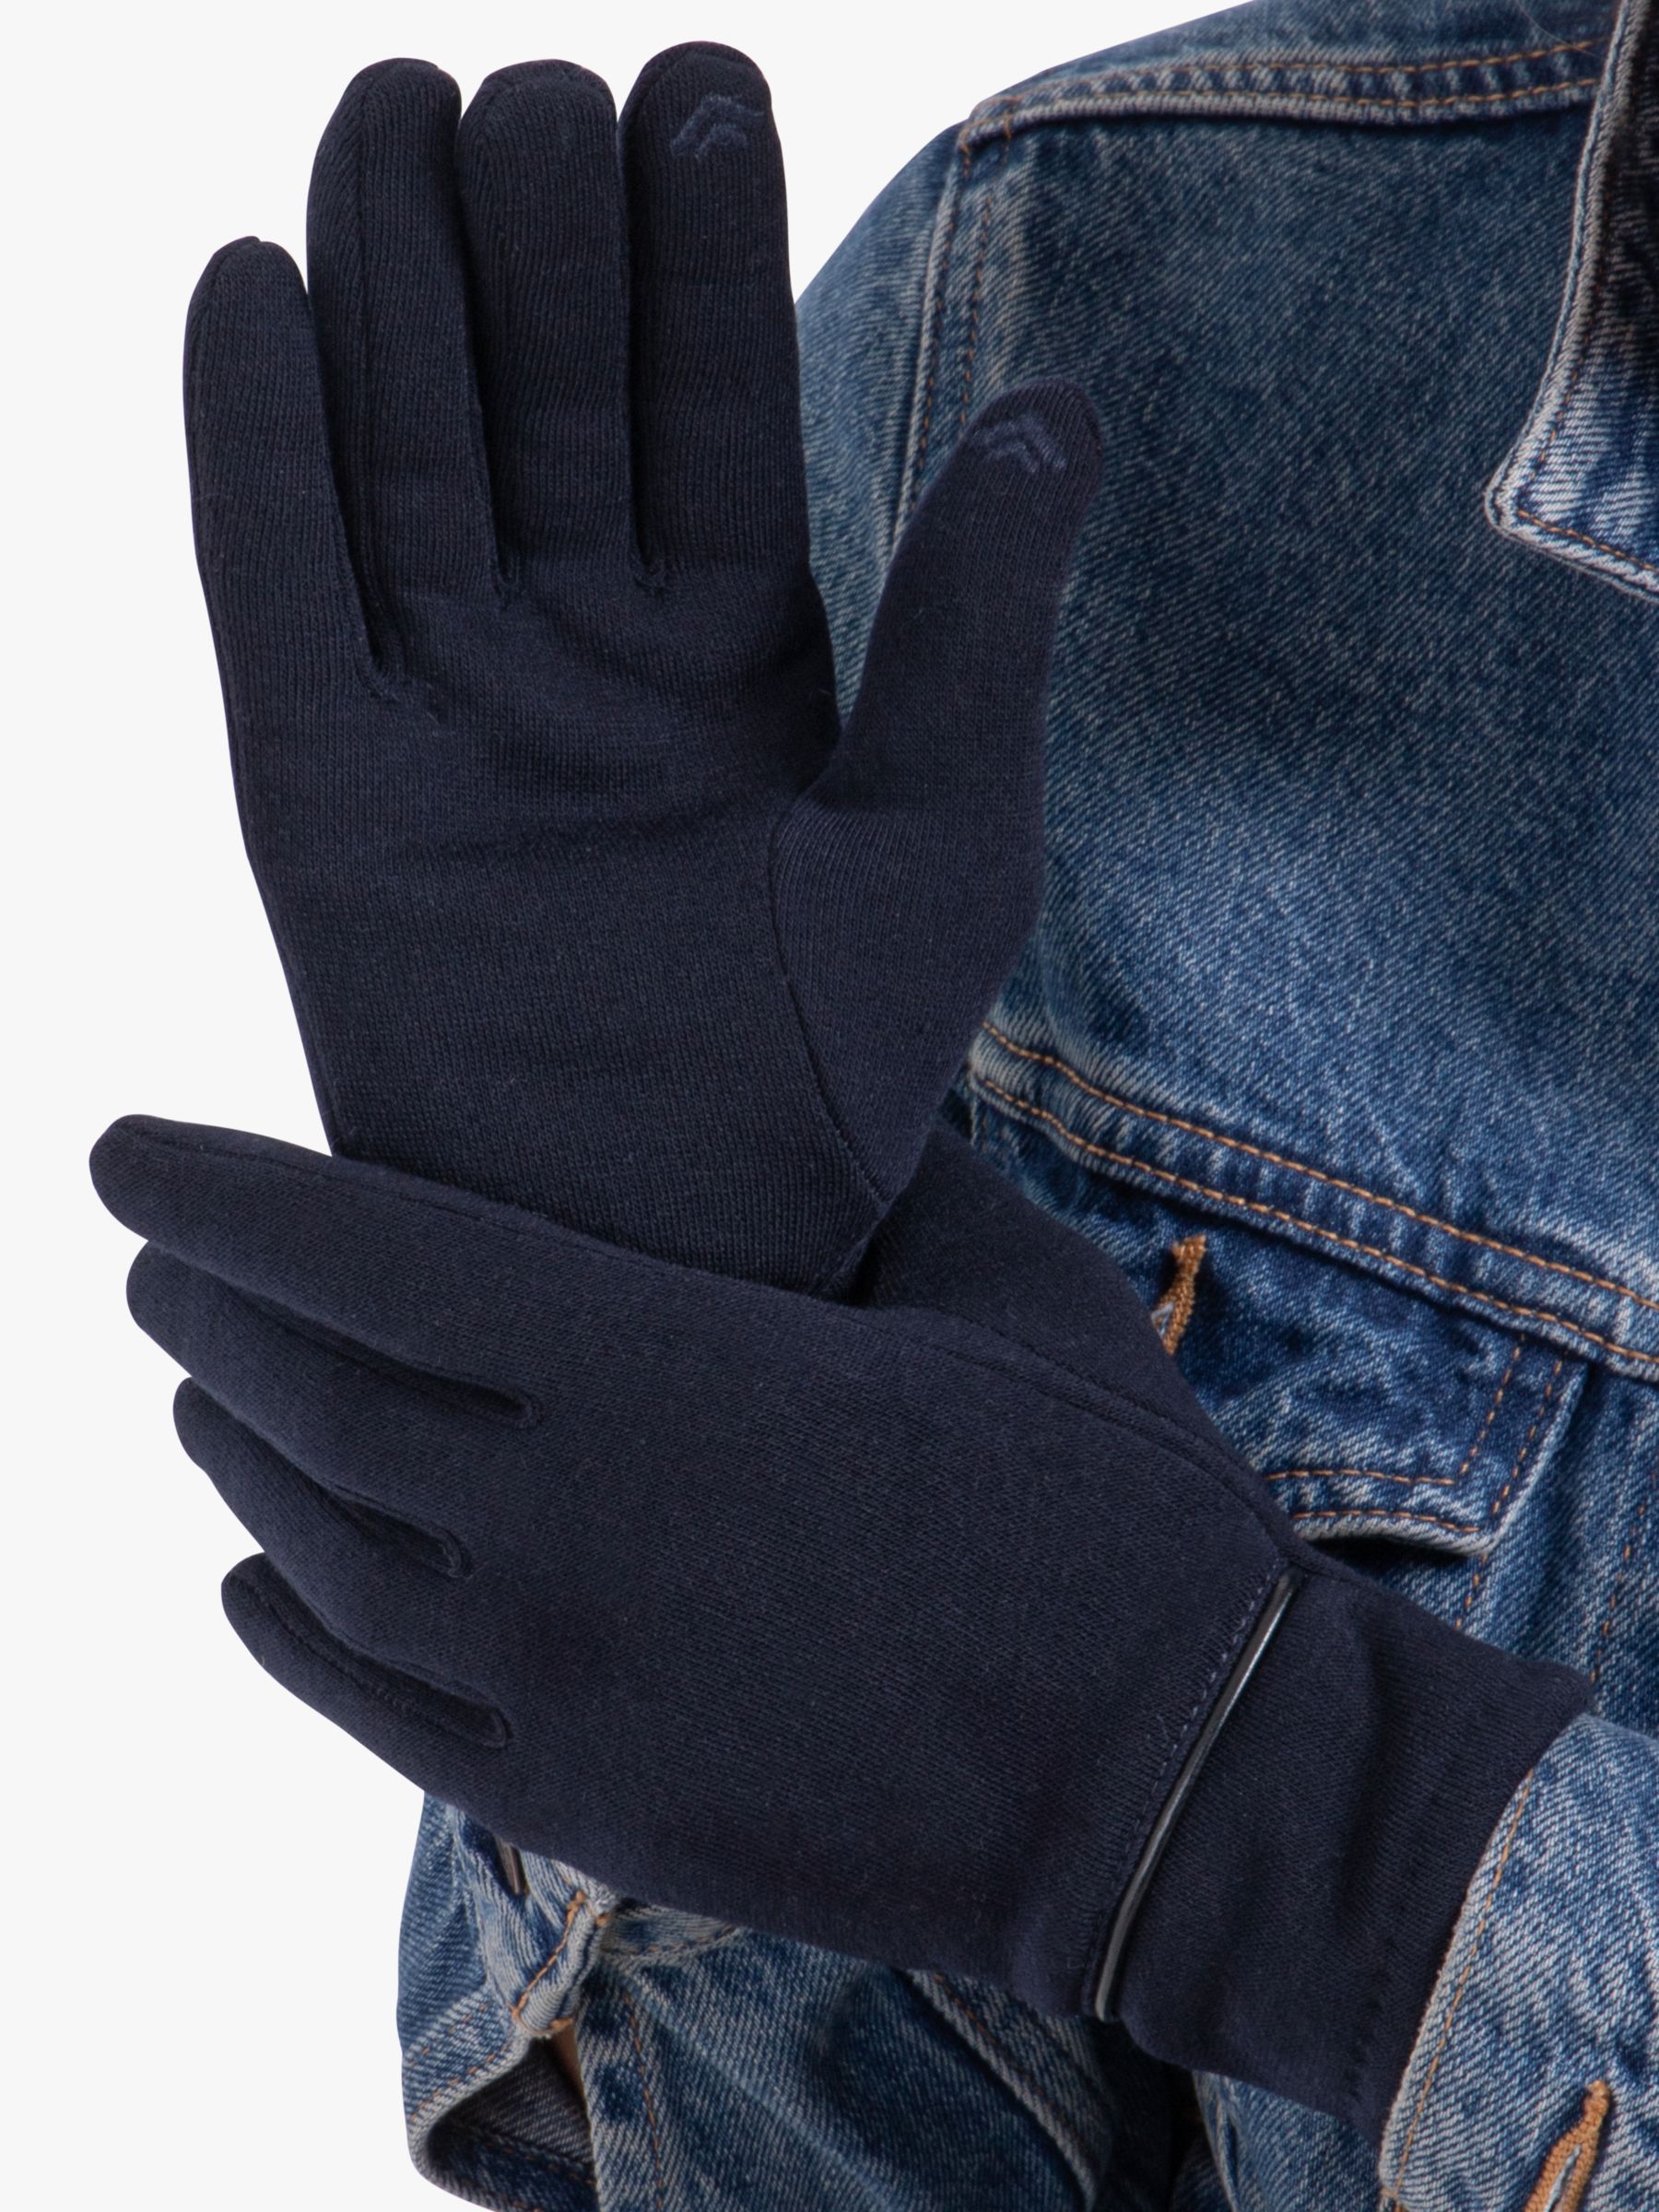 Buy totes Thermal Smartouch Piping Detail Gloves Online at johnlewis.com